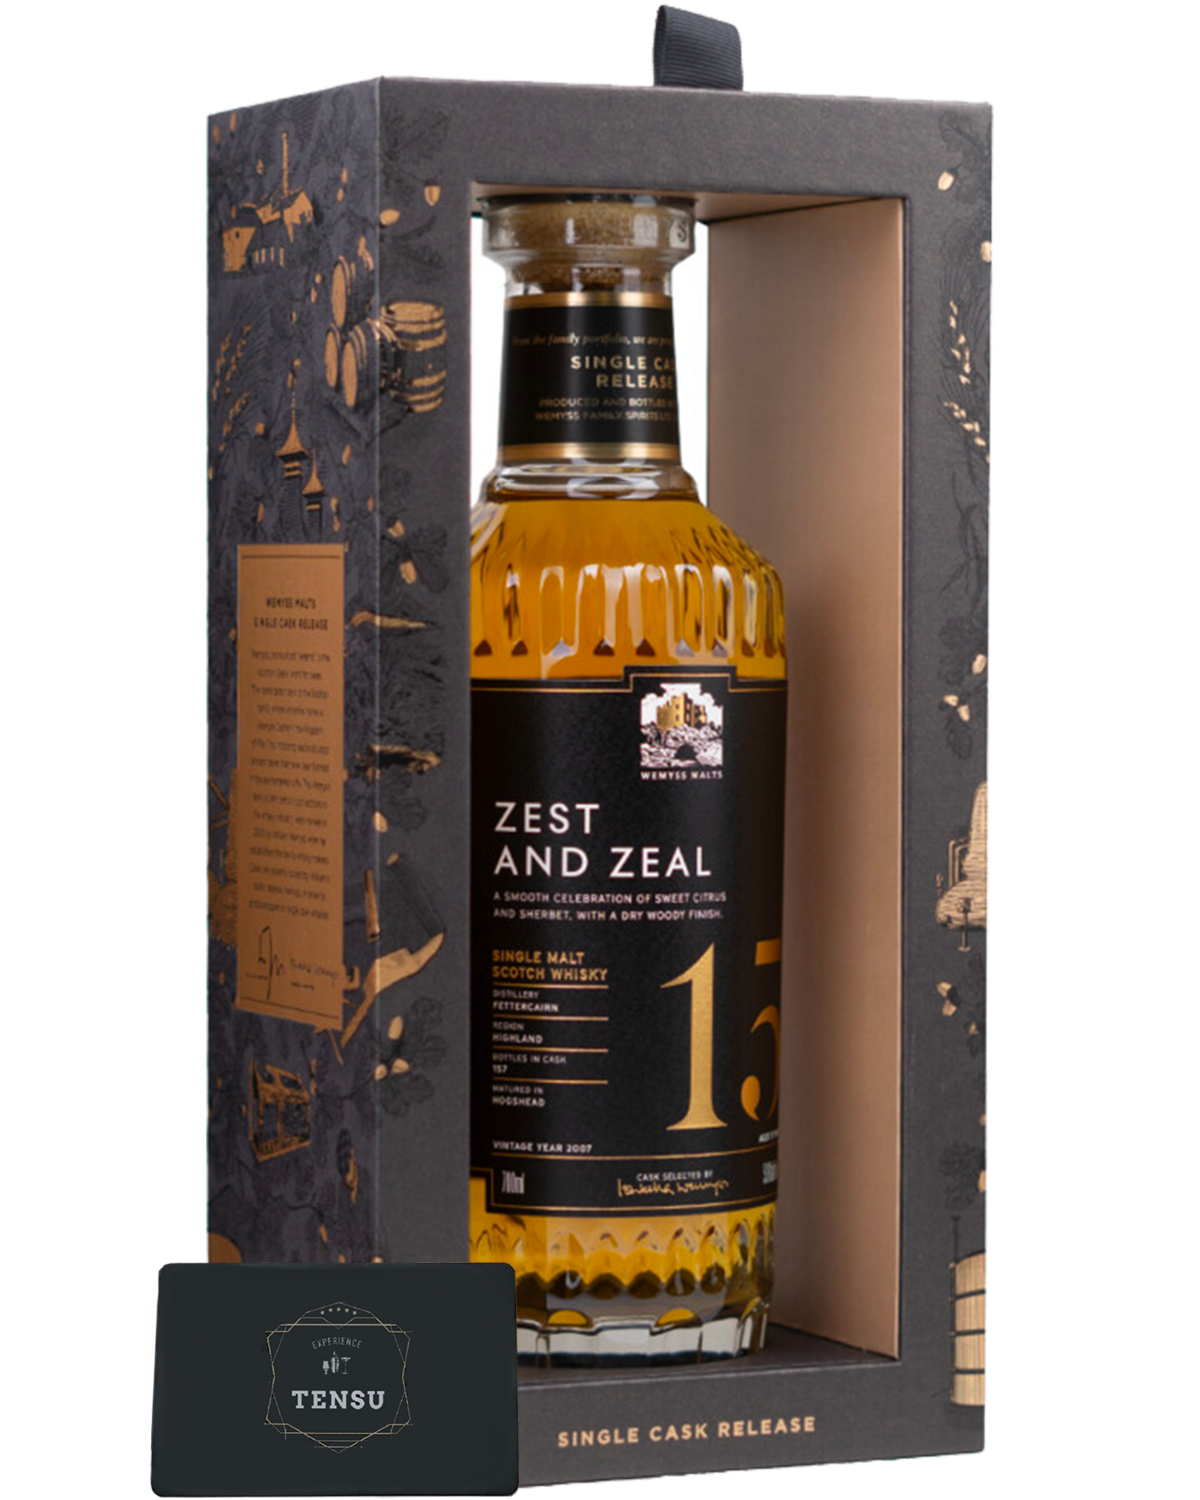 Fettercairn 15 Years Old (2007-2023) Zest And Zeal 53.6 "Wemyss"